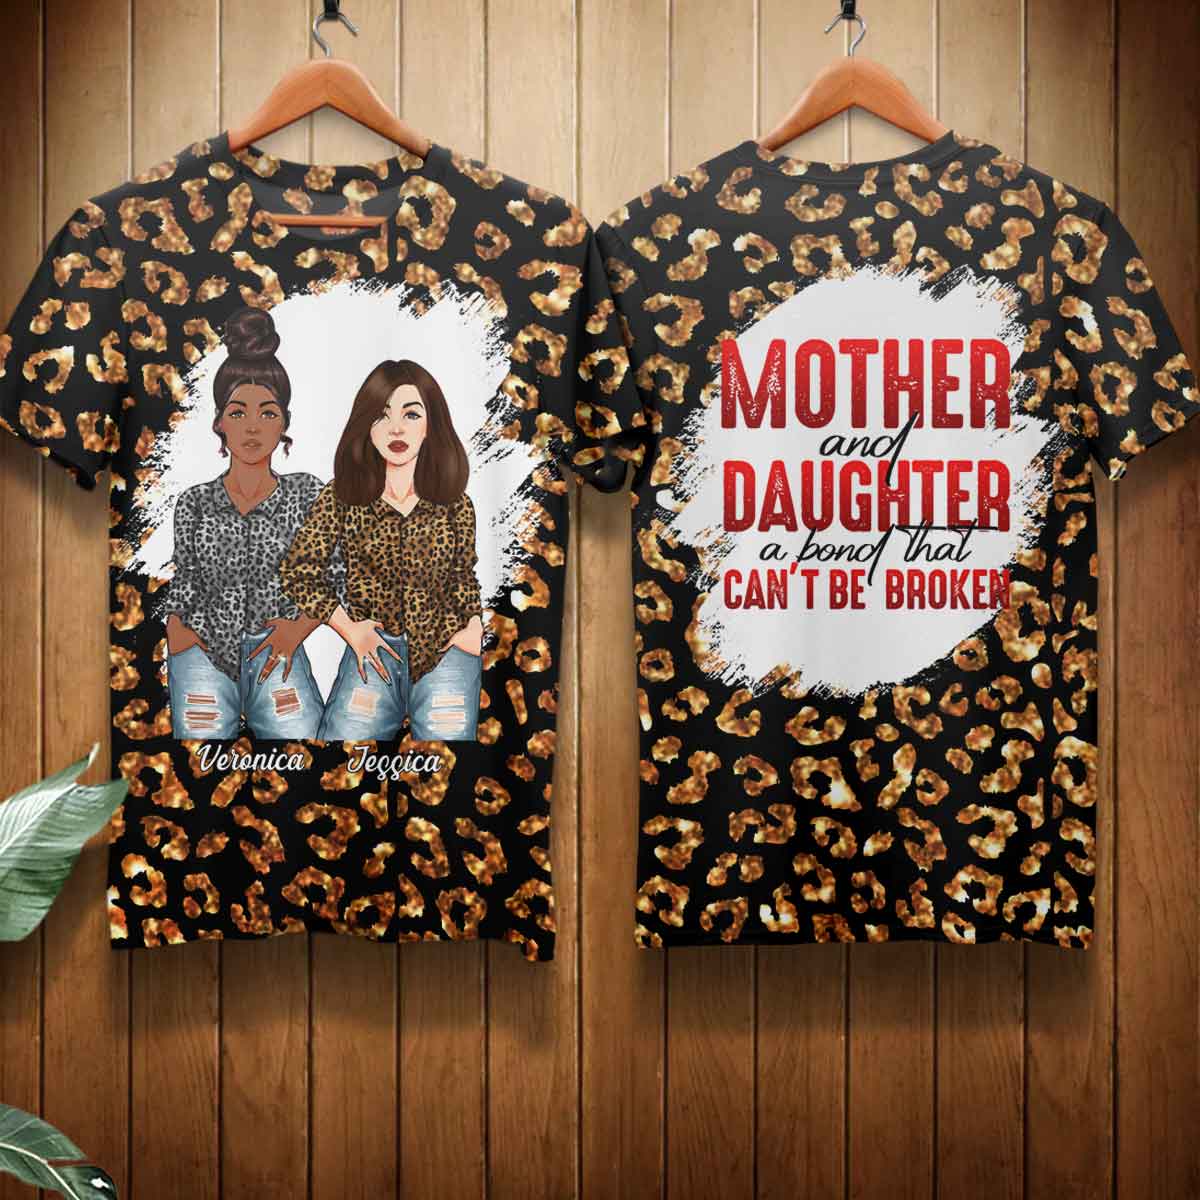 Mother And Daughter A Bond That Can't Be Broken - Personalized 3D All Over Print Shirt - Gift For Mom, Mother, Mother's Day